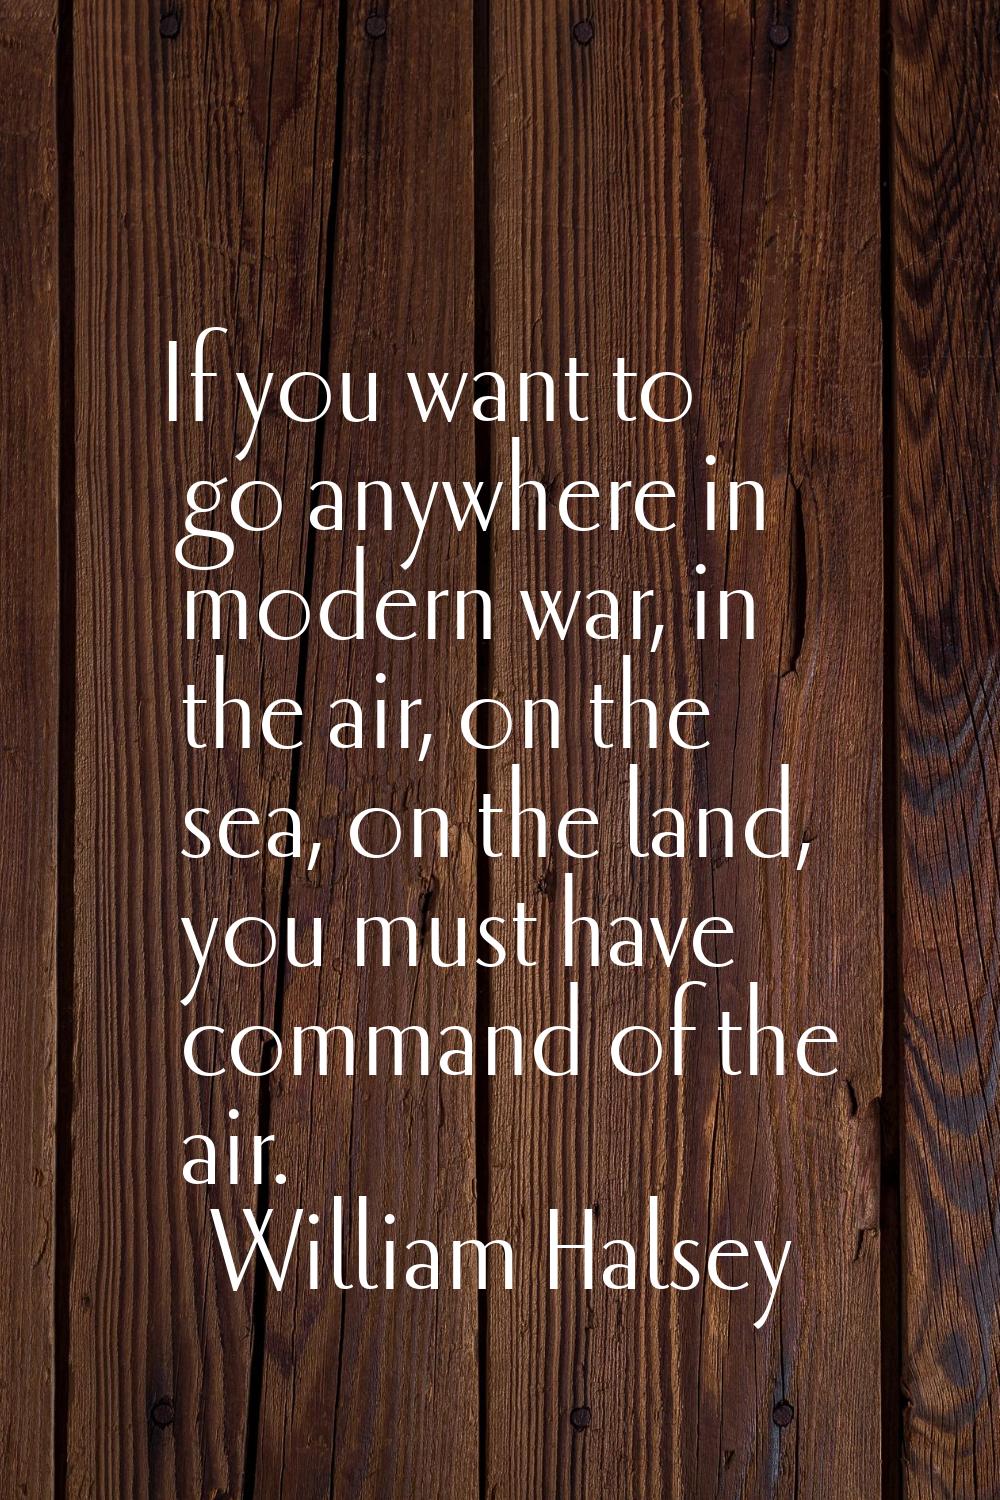 If you want to go anywhere in modern war, in the air, on the sea, on the land, you must have comman